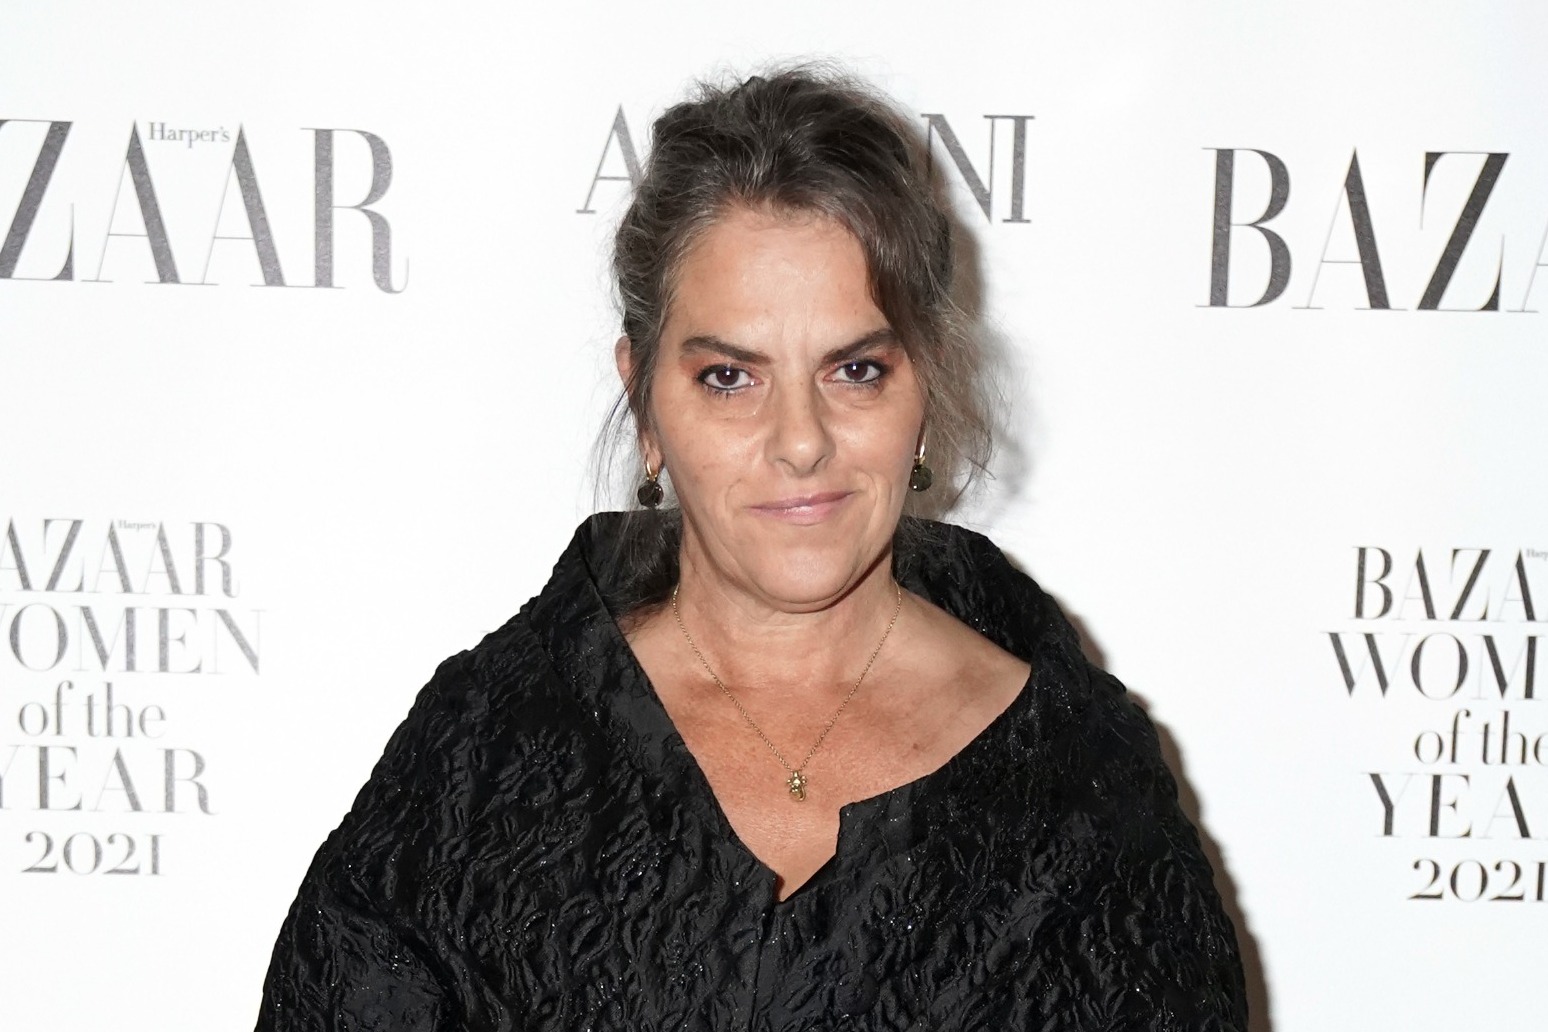 Tracey Emin: My whole life has changed following cancer surgery 